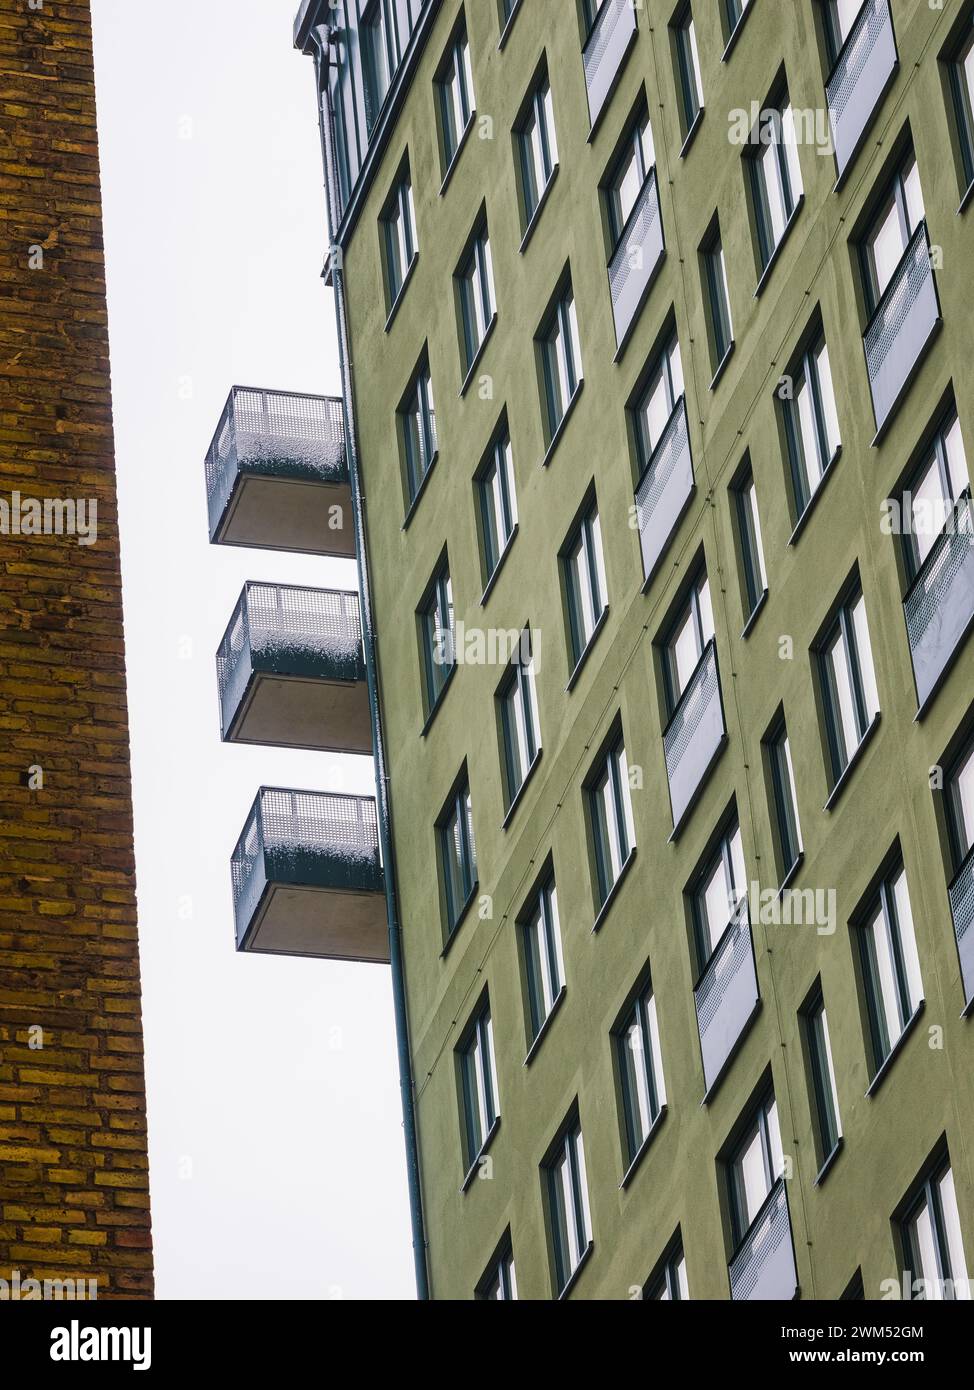 The facade of a contemporary building in Gothenburg is shown, featuring a sequence of balconies protruding against a gray sky. The buildings green ext Stock Photo